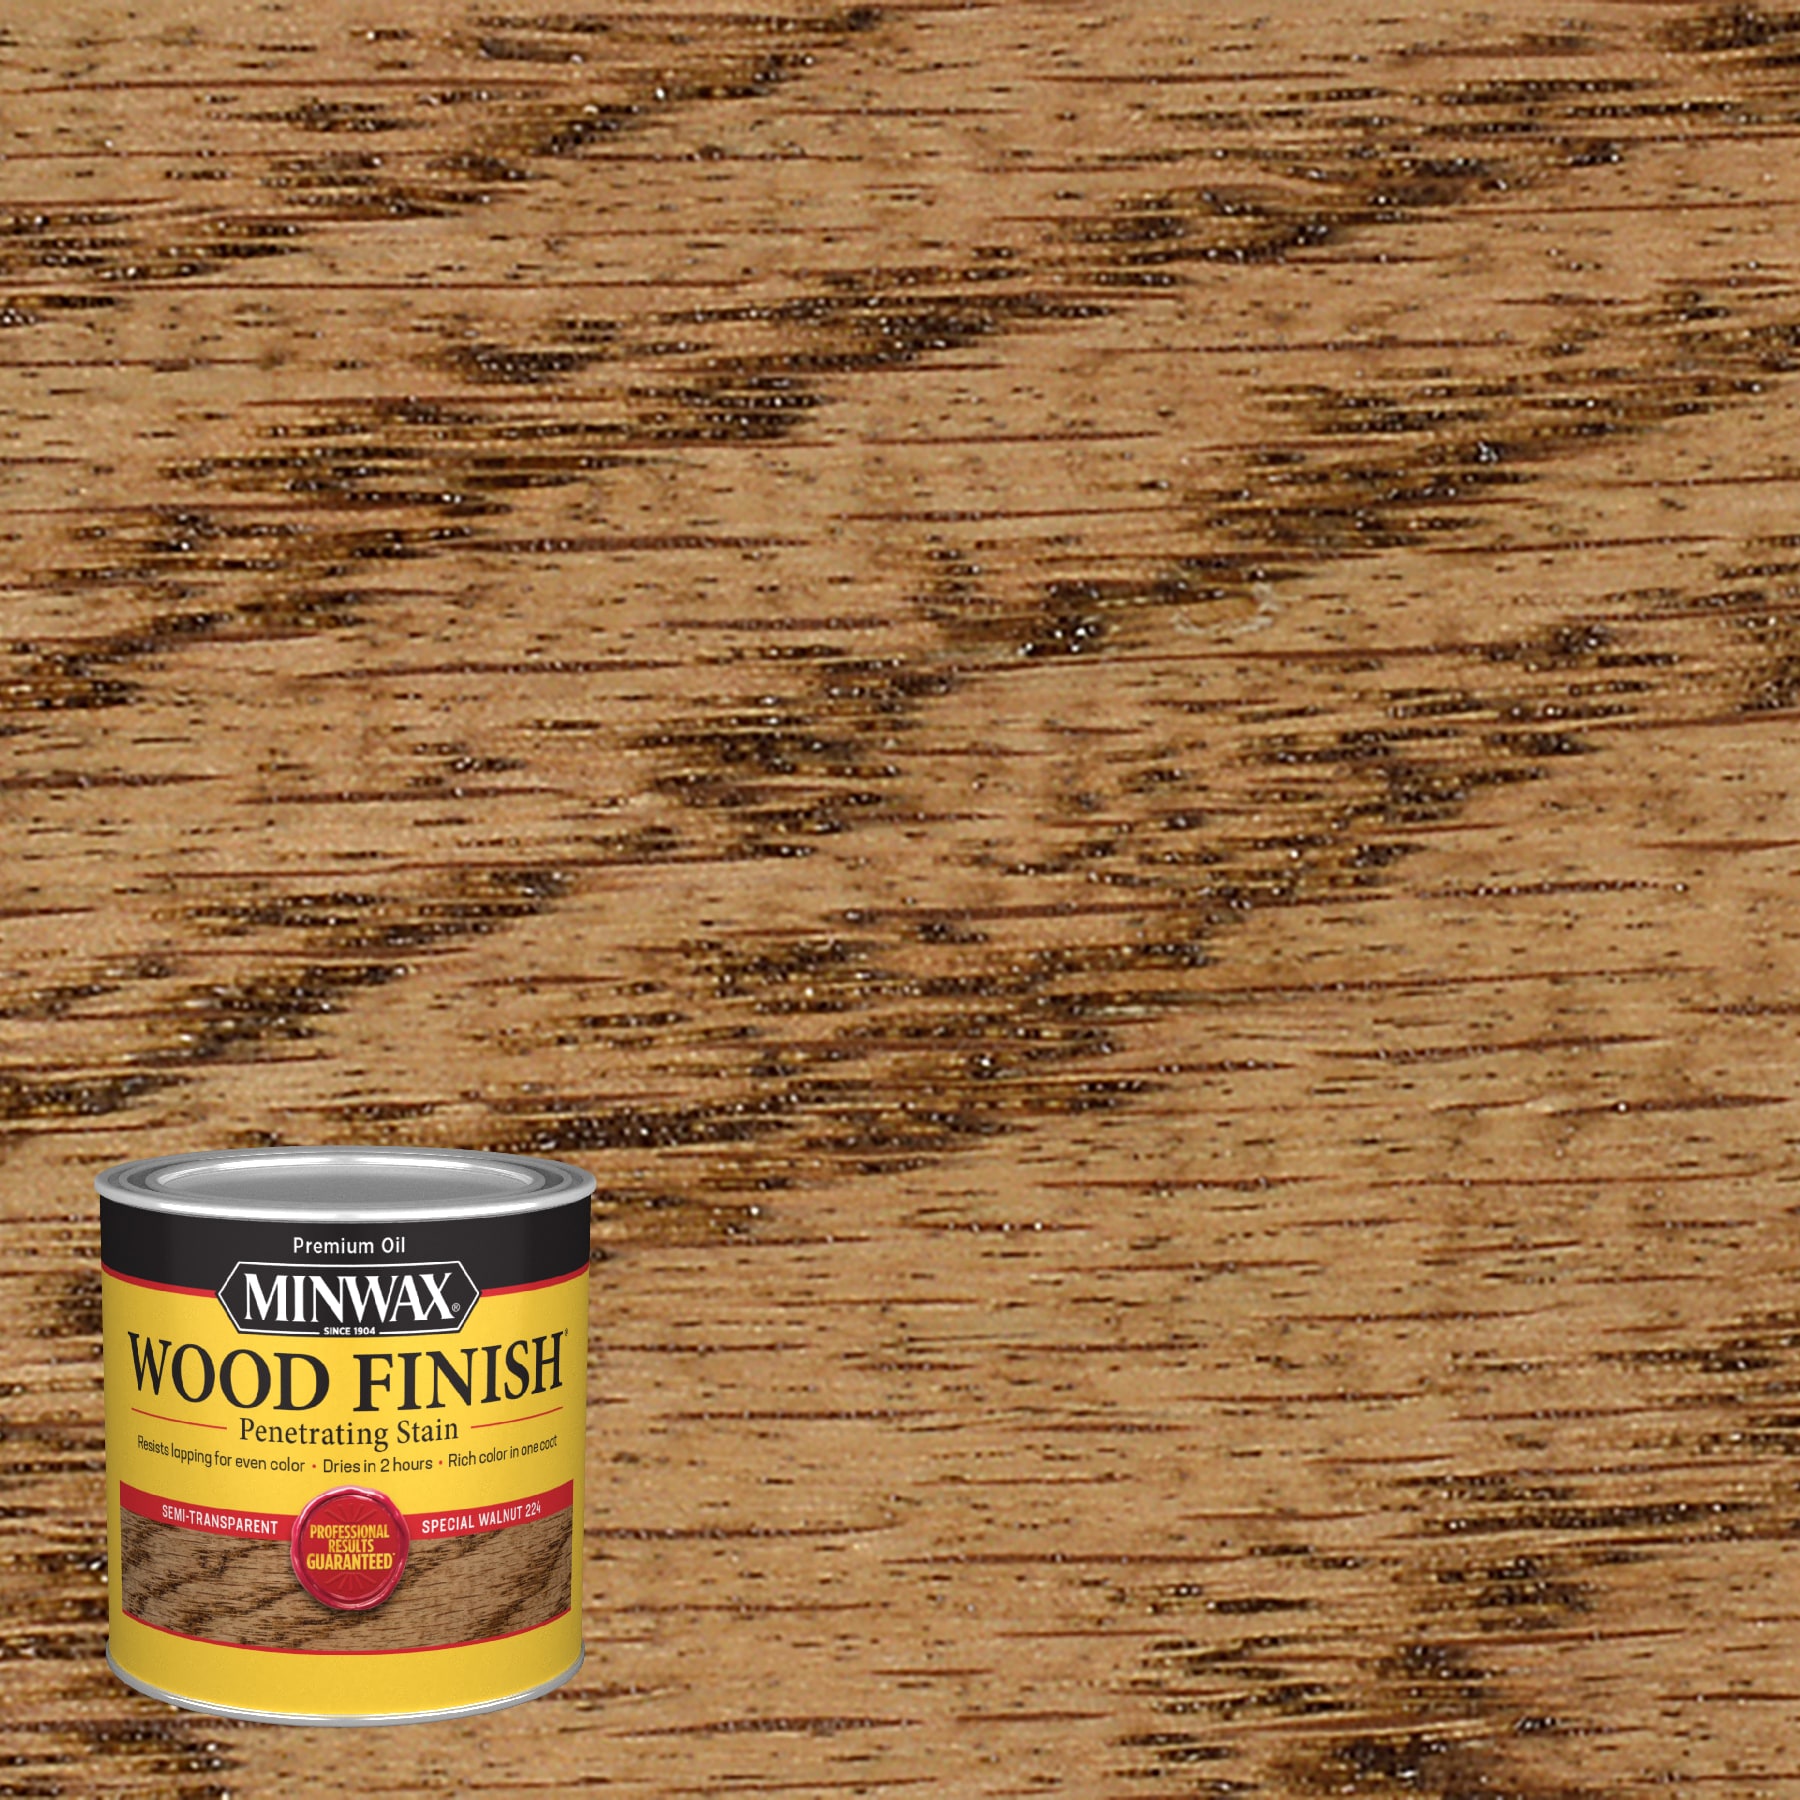 General Finishes - Wood Stain - Oil Based - American Walnut - Half Pint